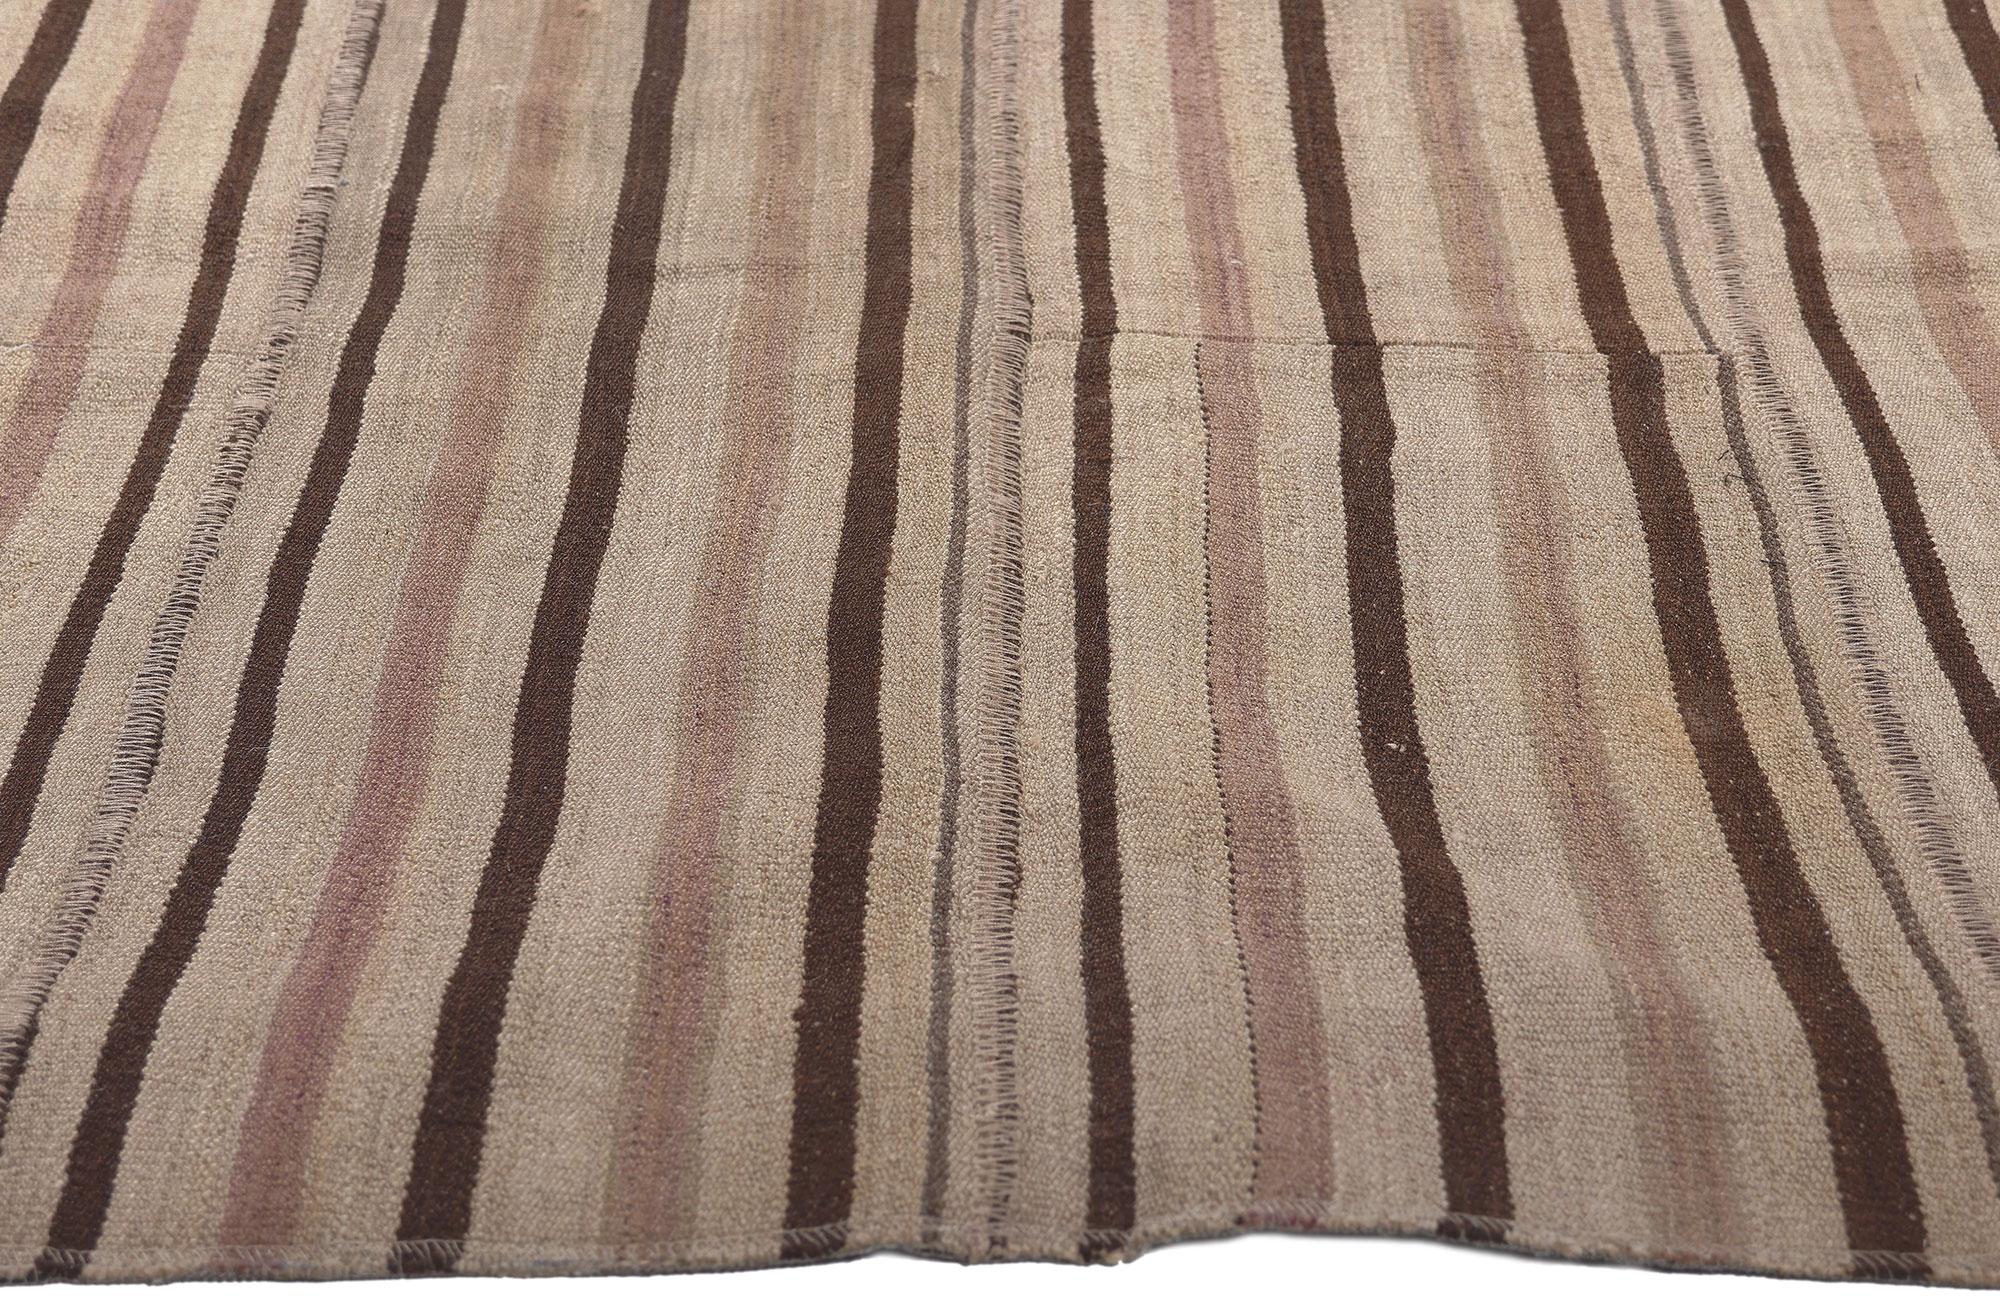 Vintage Turkish Kilim Rug with Stripes and Modern Style with Neutral Colors In Good Condition For Sale In Dallas, TX